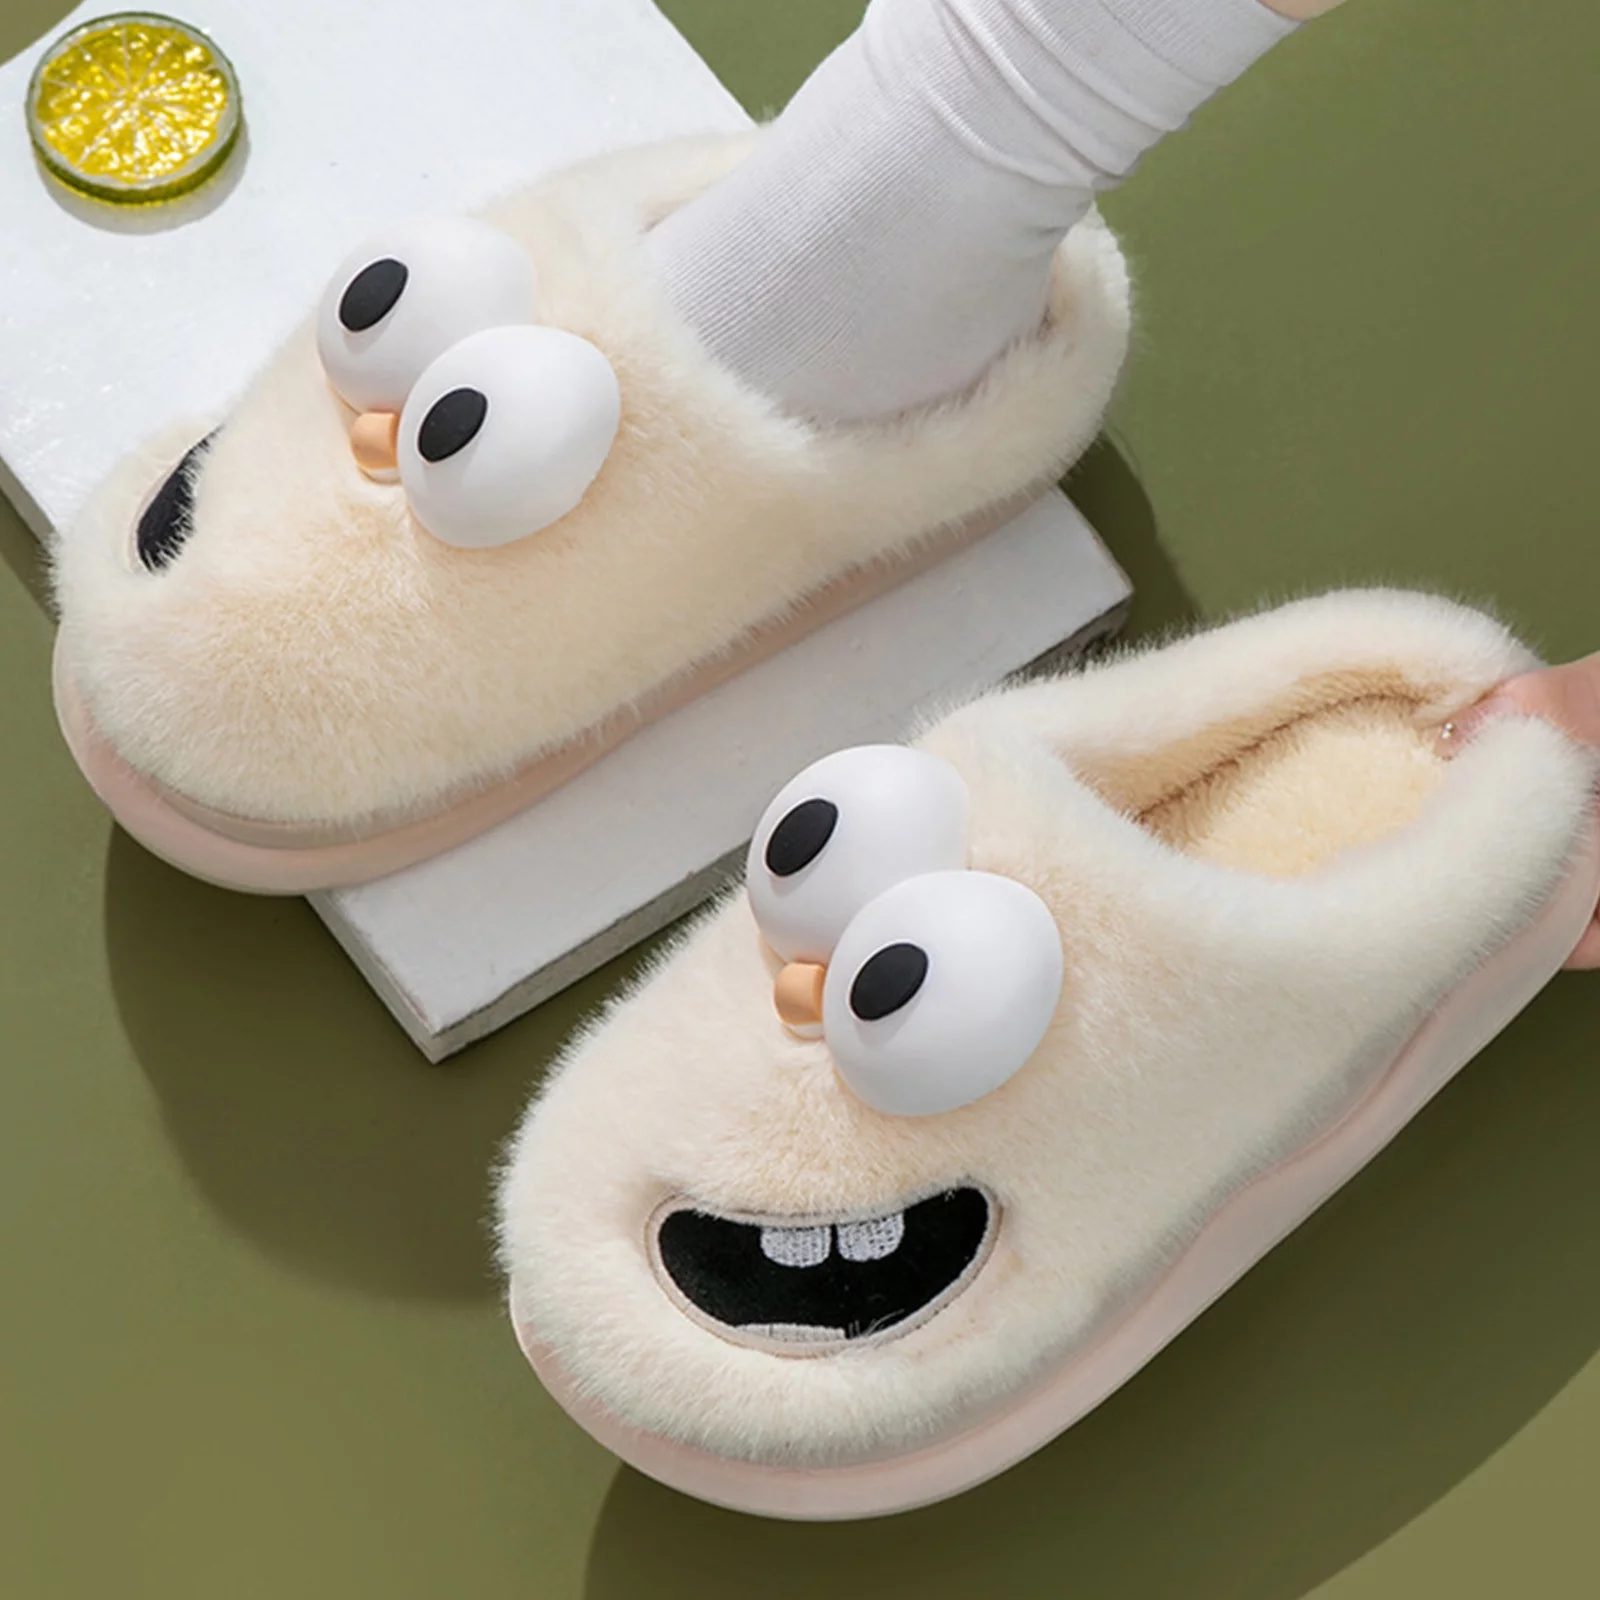 Women Funny Warm Monster Plush Slippers Cute Big Eyes Cotton Slippers